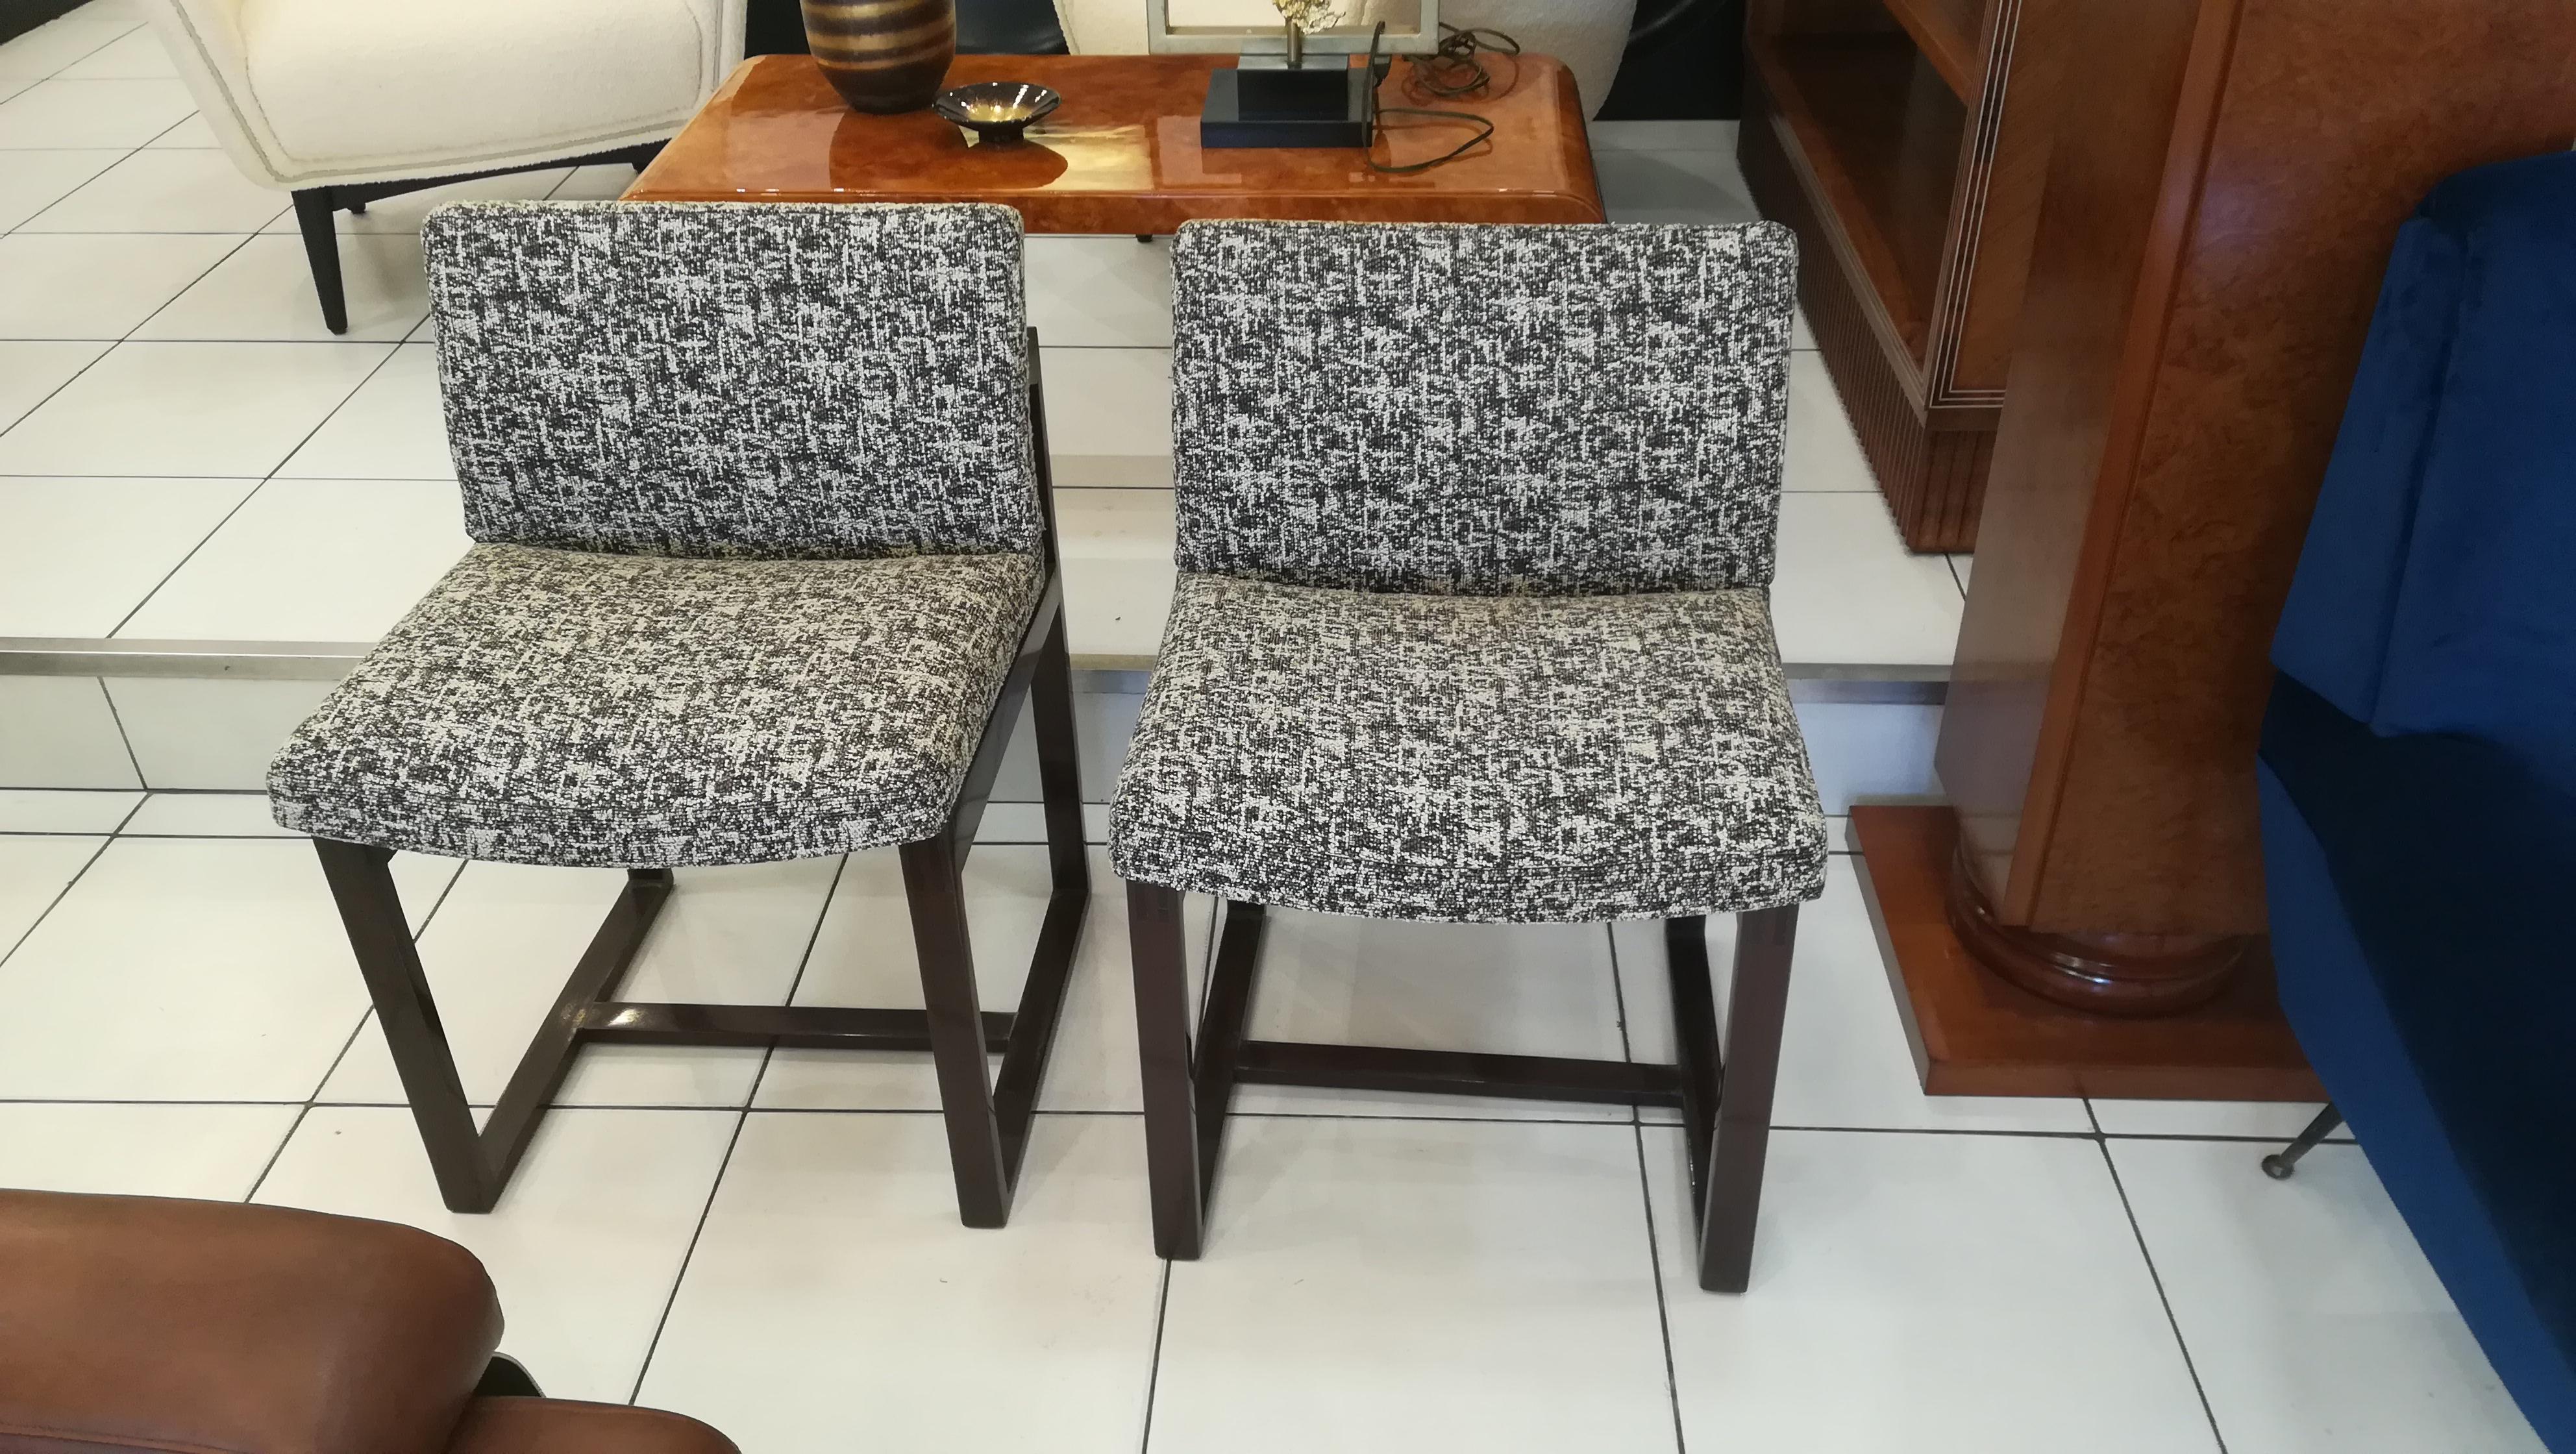 Pair of Andre Sornay seats, circa 1950 (original fabric in perfct condition).